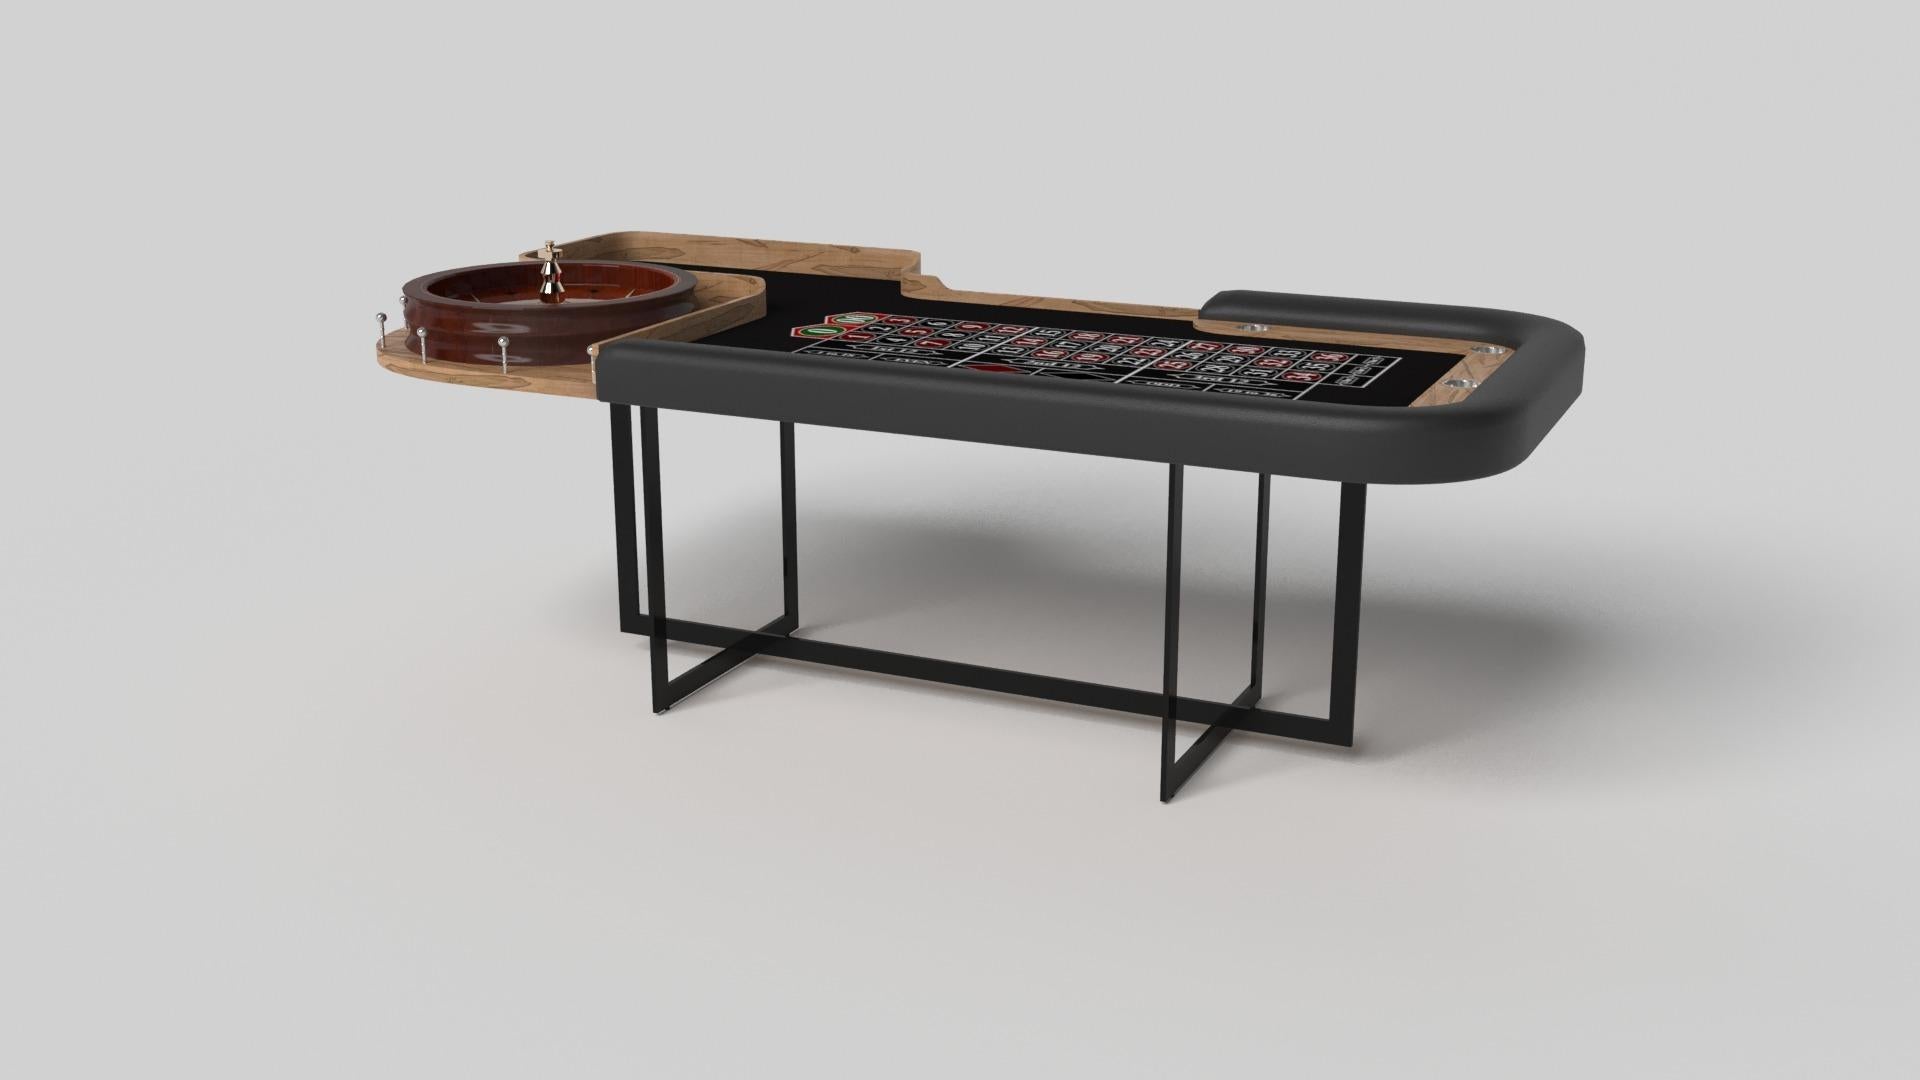 With an open metal foundation, our Beso table is a unique expression of contemporary forms and negative space. This roulette table is handcrafted by our master artisans with a rectangle-in-rectangle base that echoes the angles and edges of a